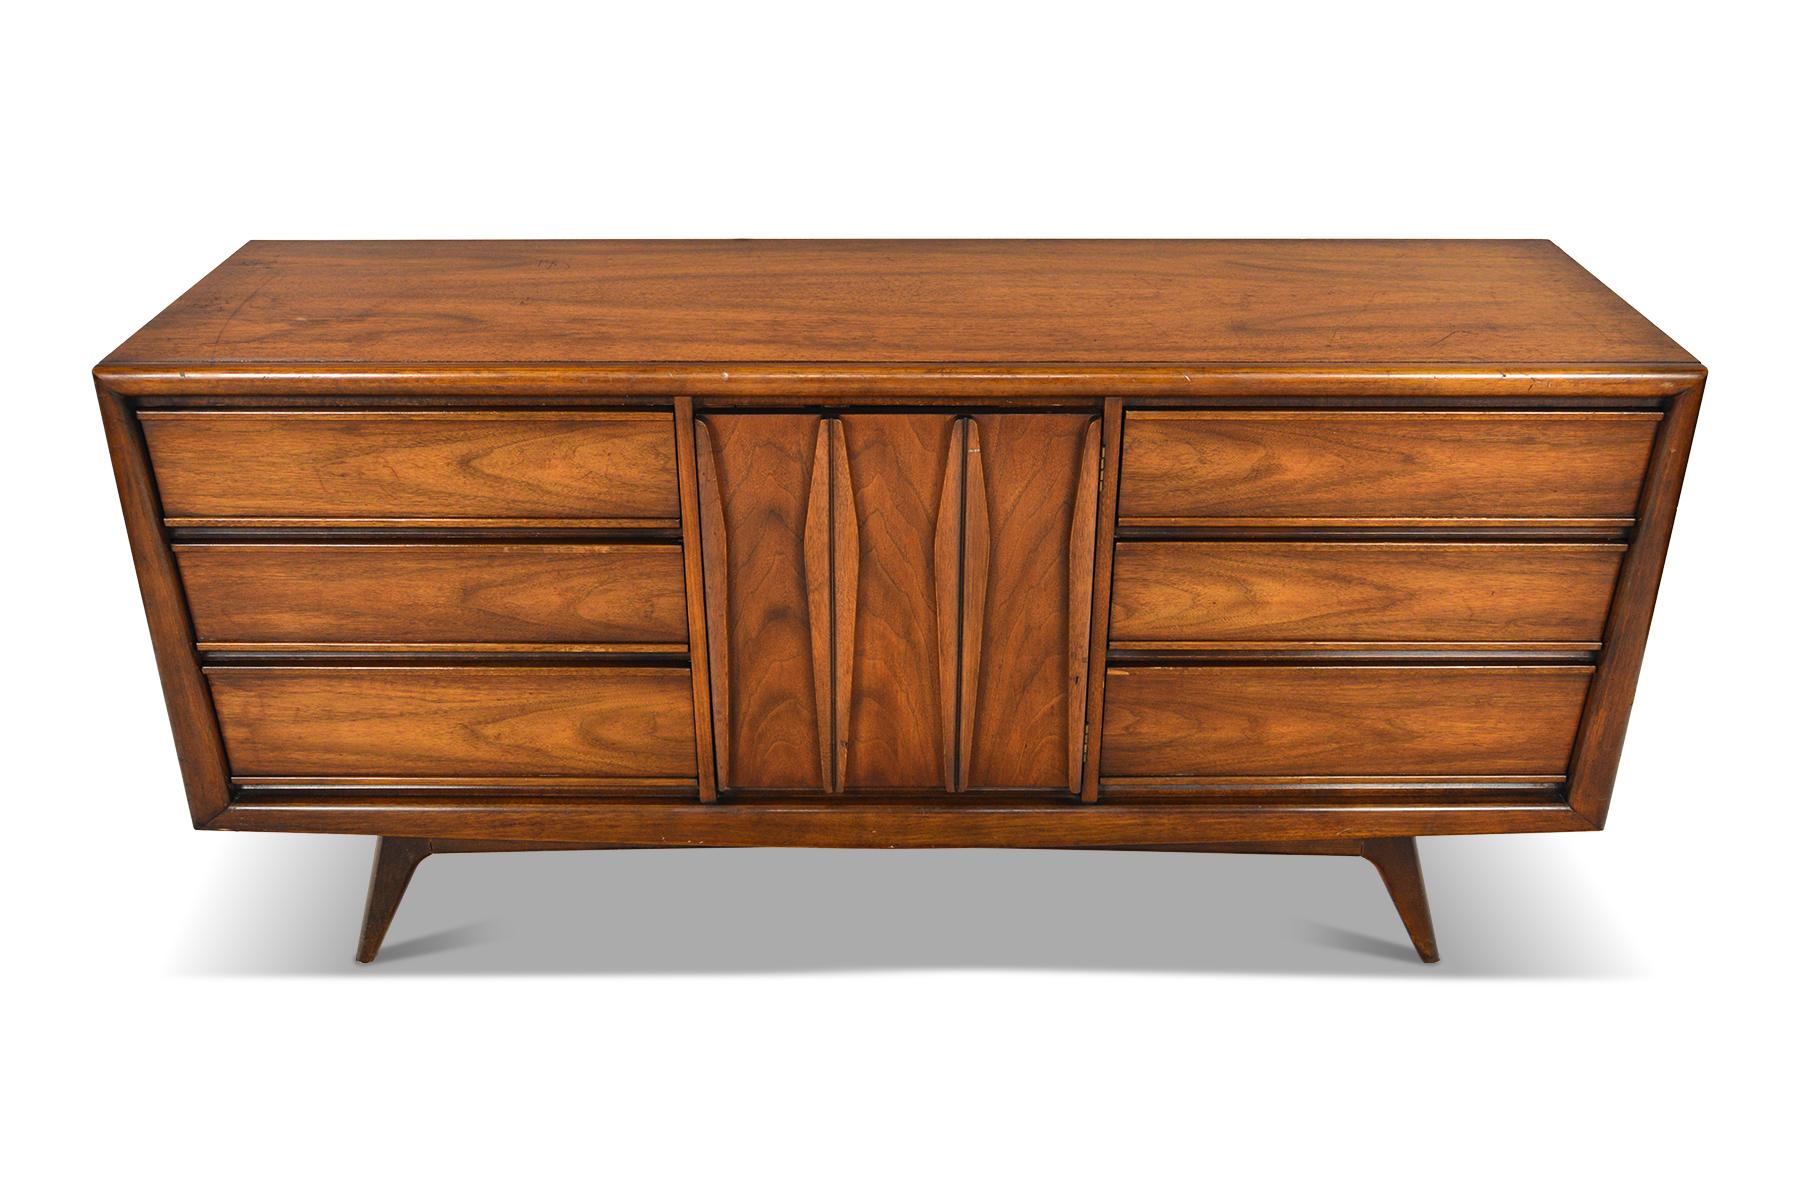 This low midcentury dresser was designed by United in the 1960s. In good original condition with light cosmetic wear.

Measurements: 66 wide x 19 deep x 32 tall
Drawer: 20.5 wide x 15.5 deep x 4.5 tall.